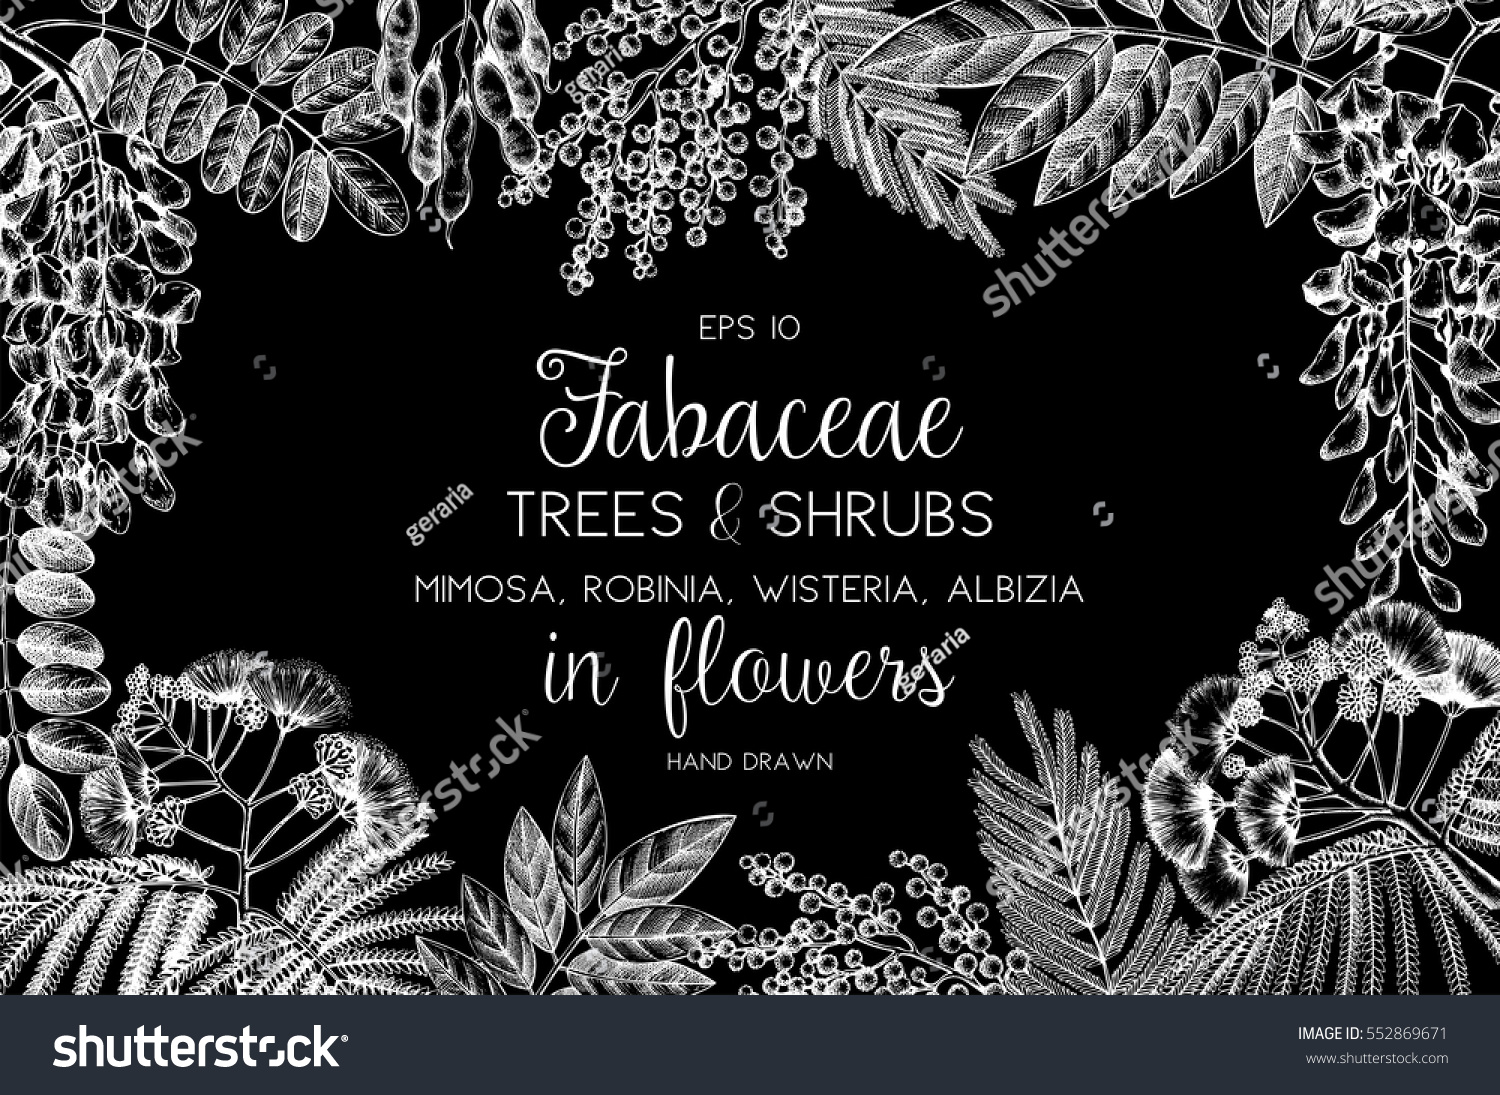 SVG of Vintage trees and shrubs in flowers illustration. Valentine's Day or Wedding design template on black background. Vector greeting card with hand drawn wisteria, robinia, silver wattle, albizia sketch. svg